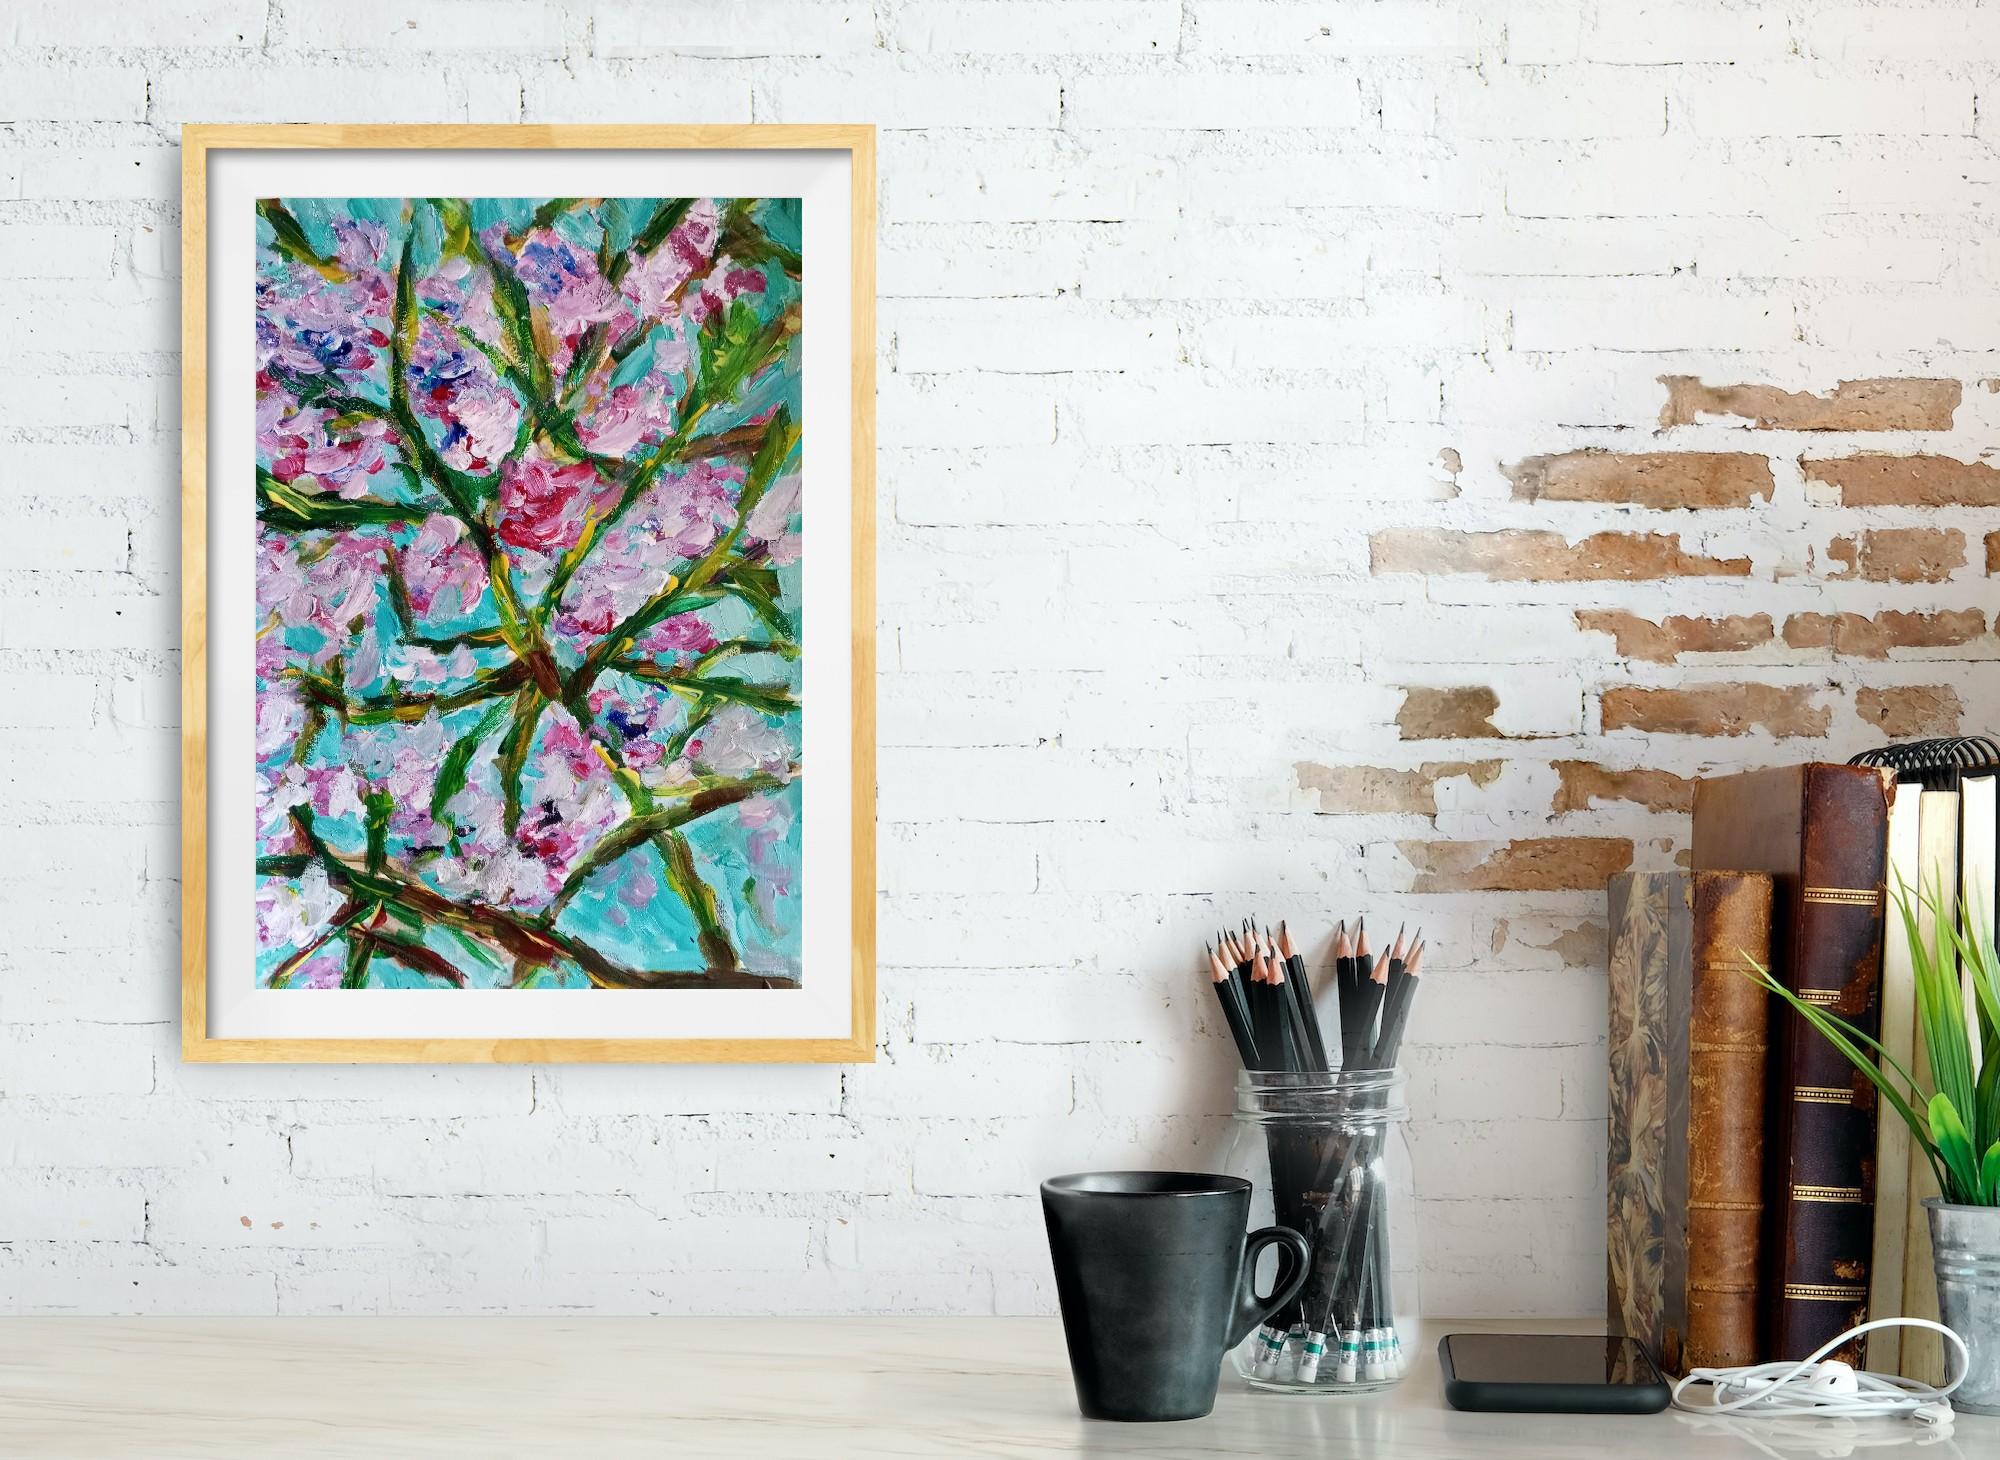 Almond blossom  - Painting by Natalya Mougenot 